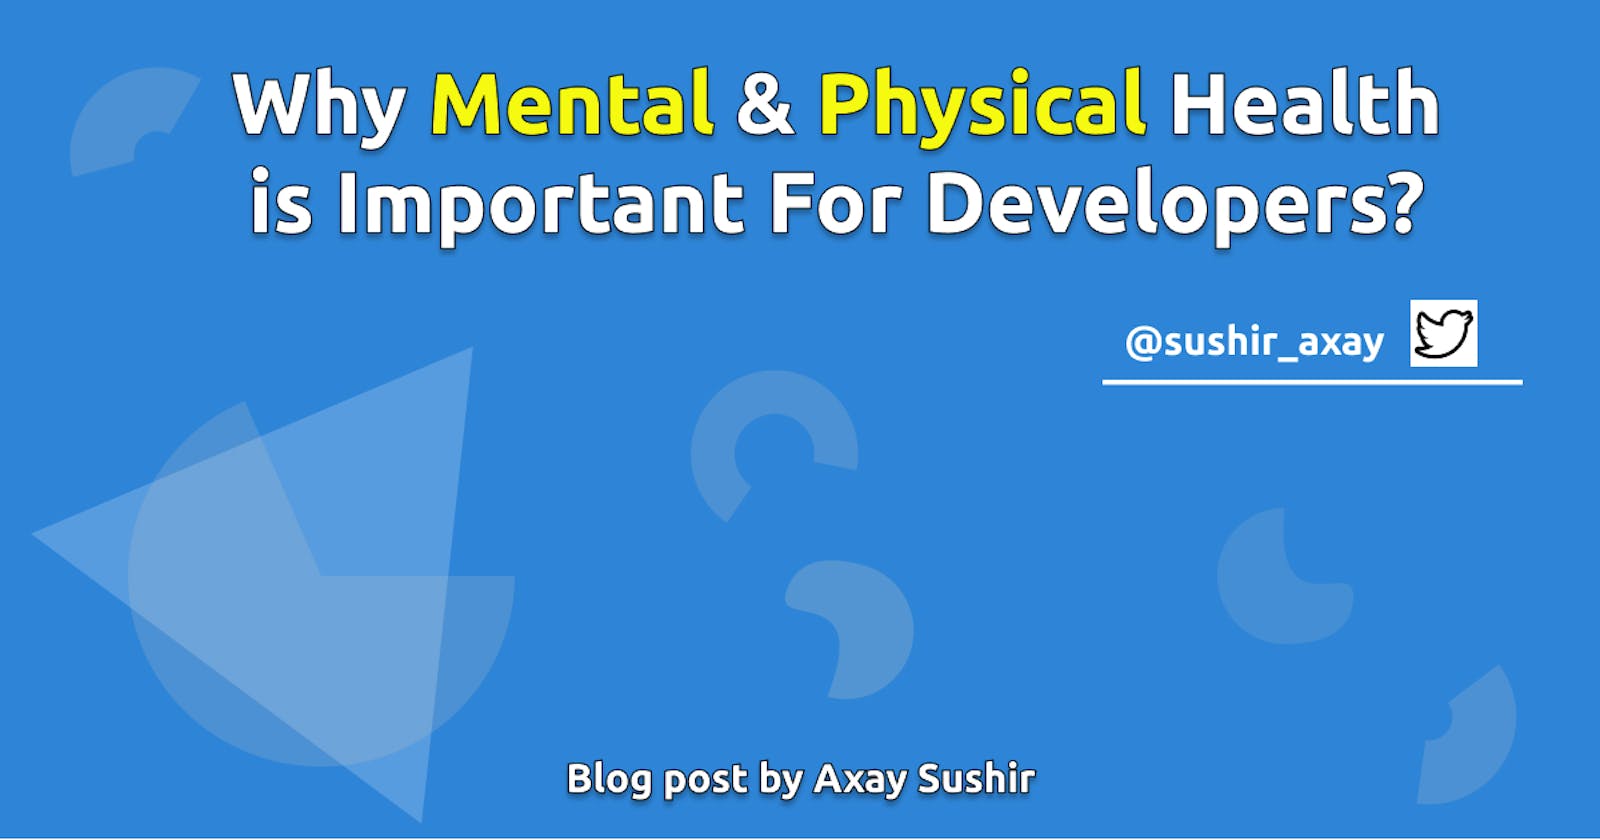 Why Mental & Physical Health is Important for Developers?